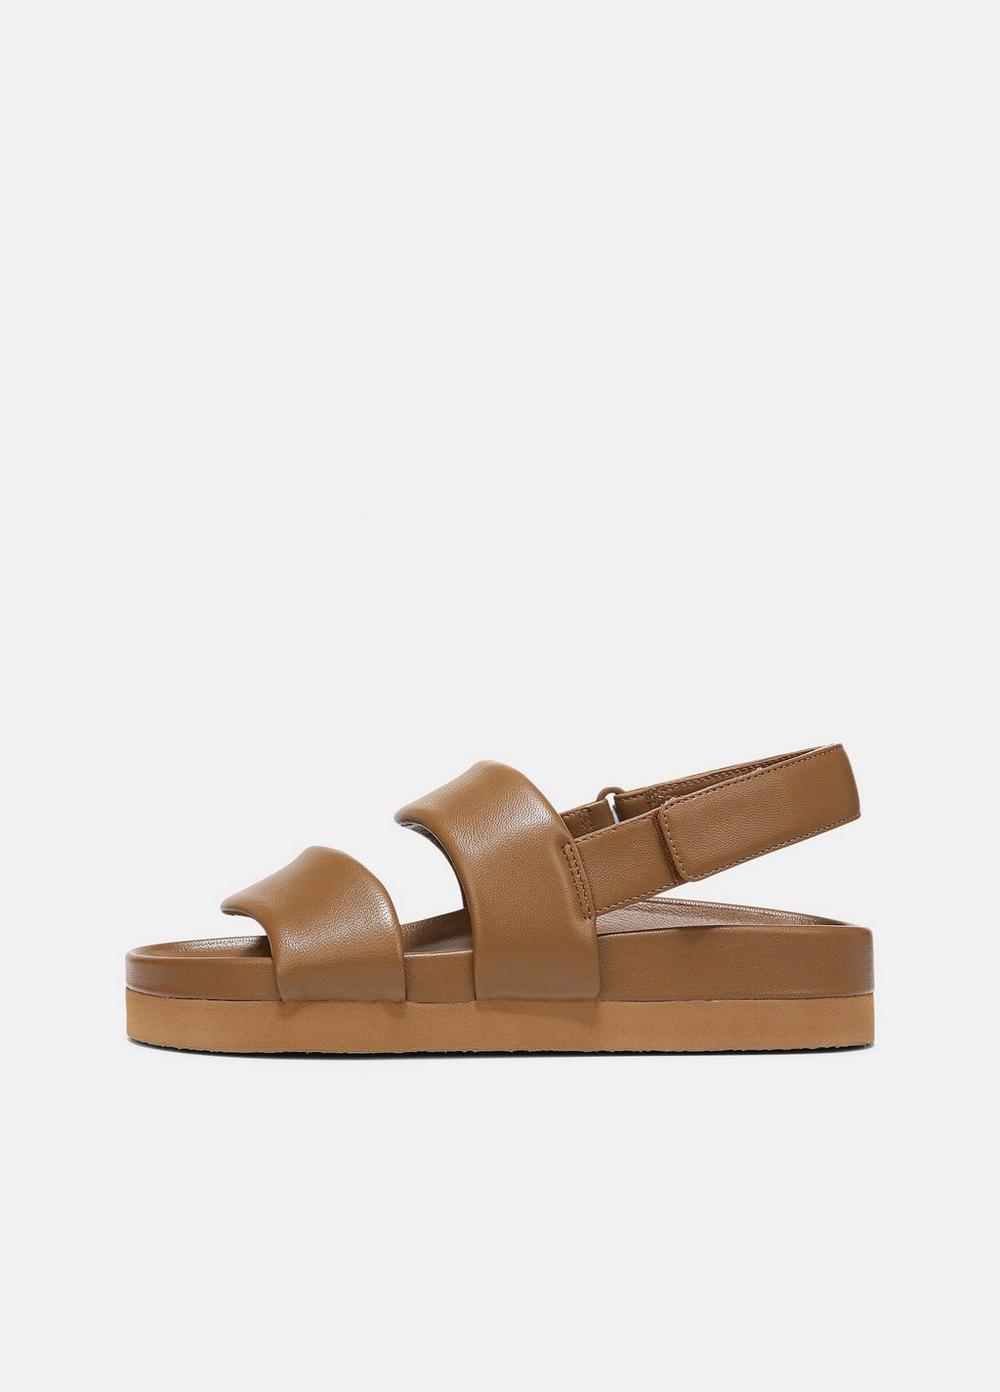 Gemini Leather Sandal in Sandals | Vince